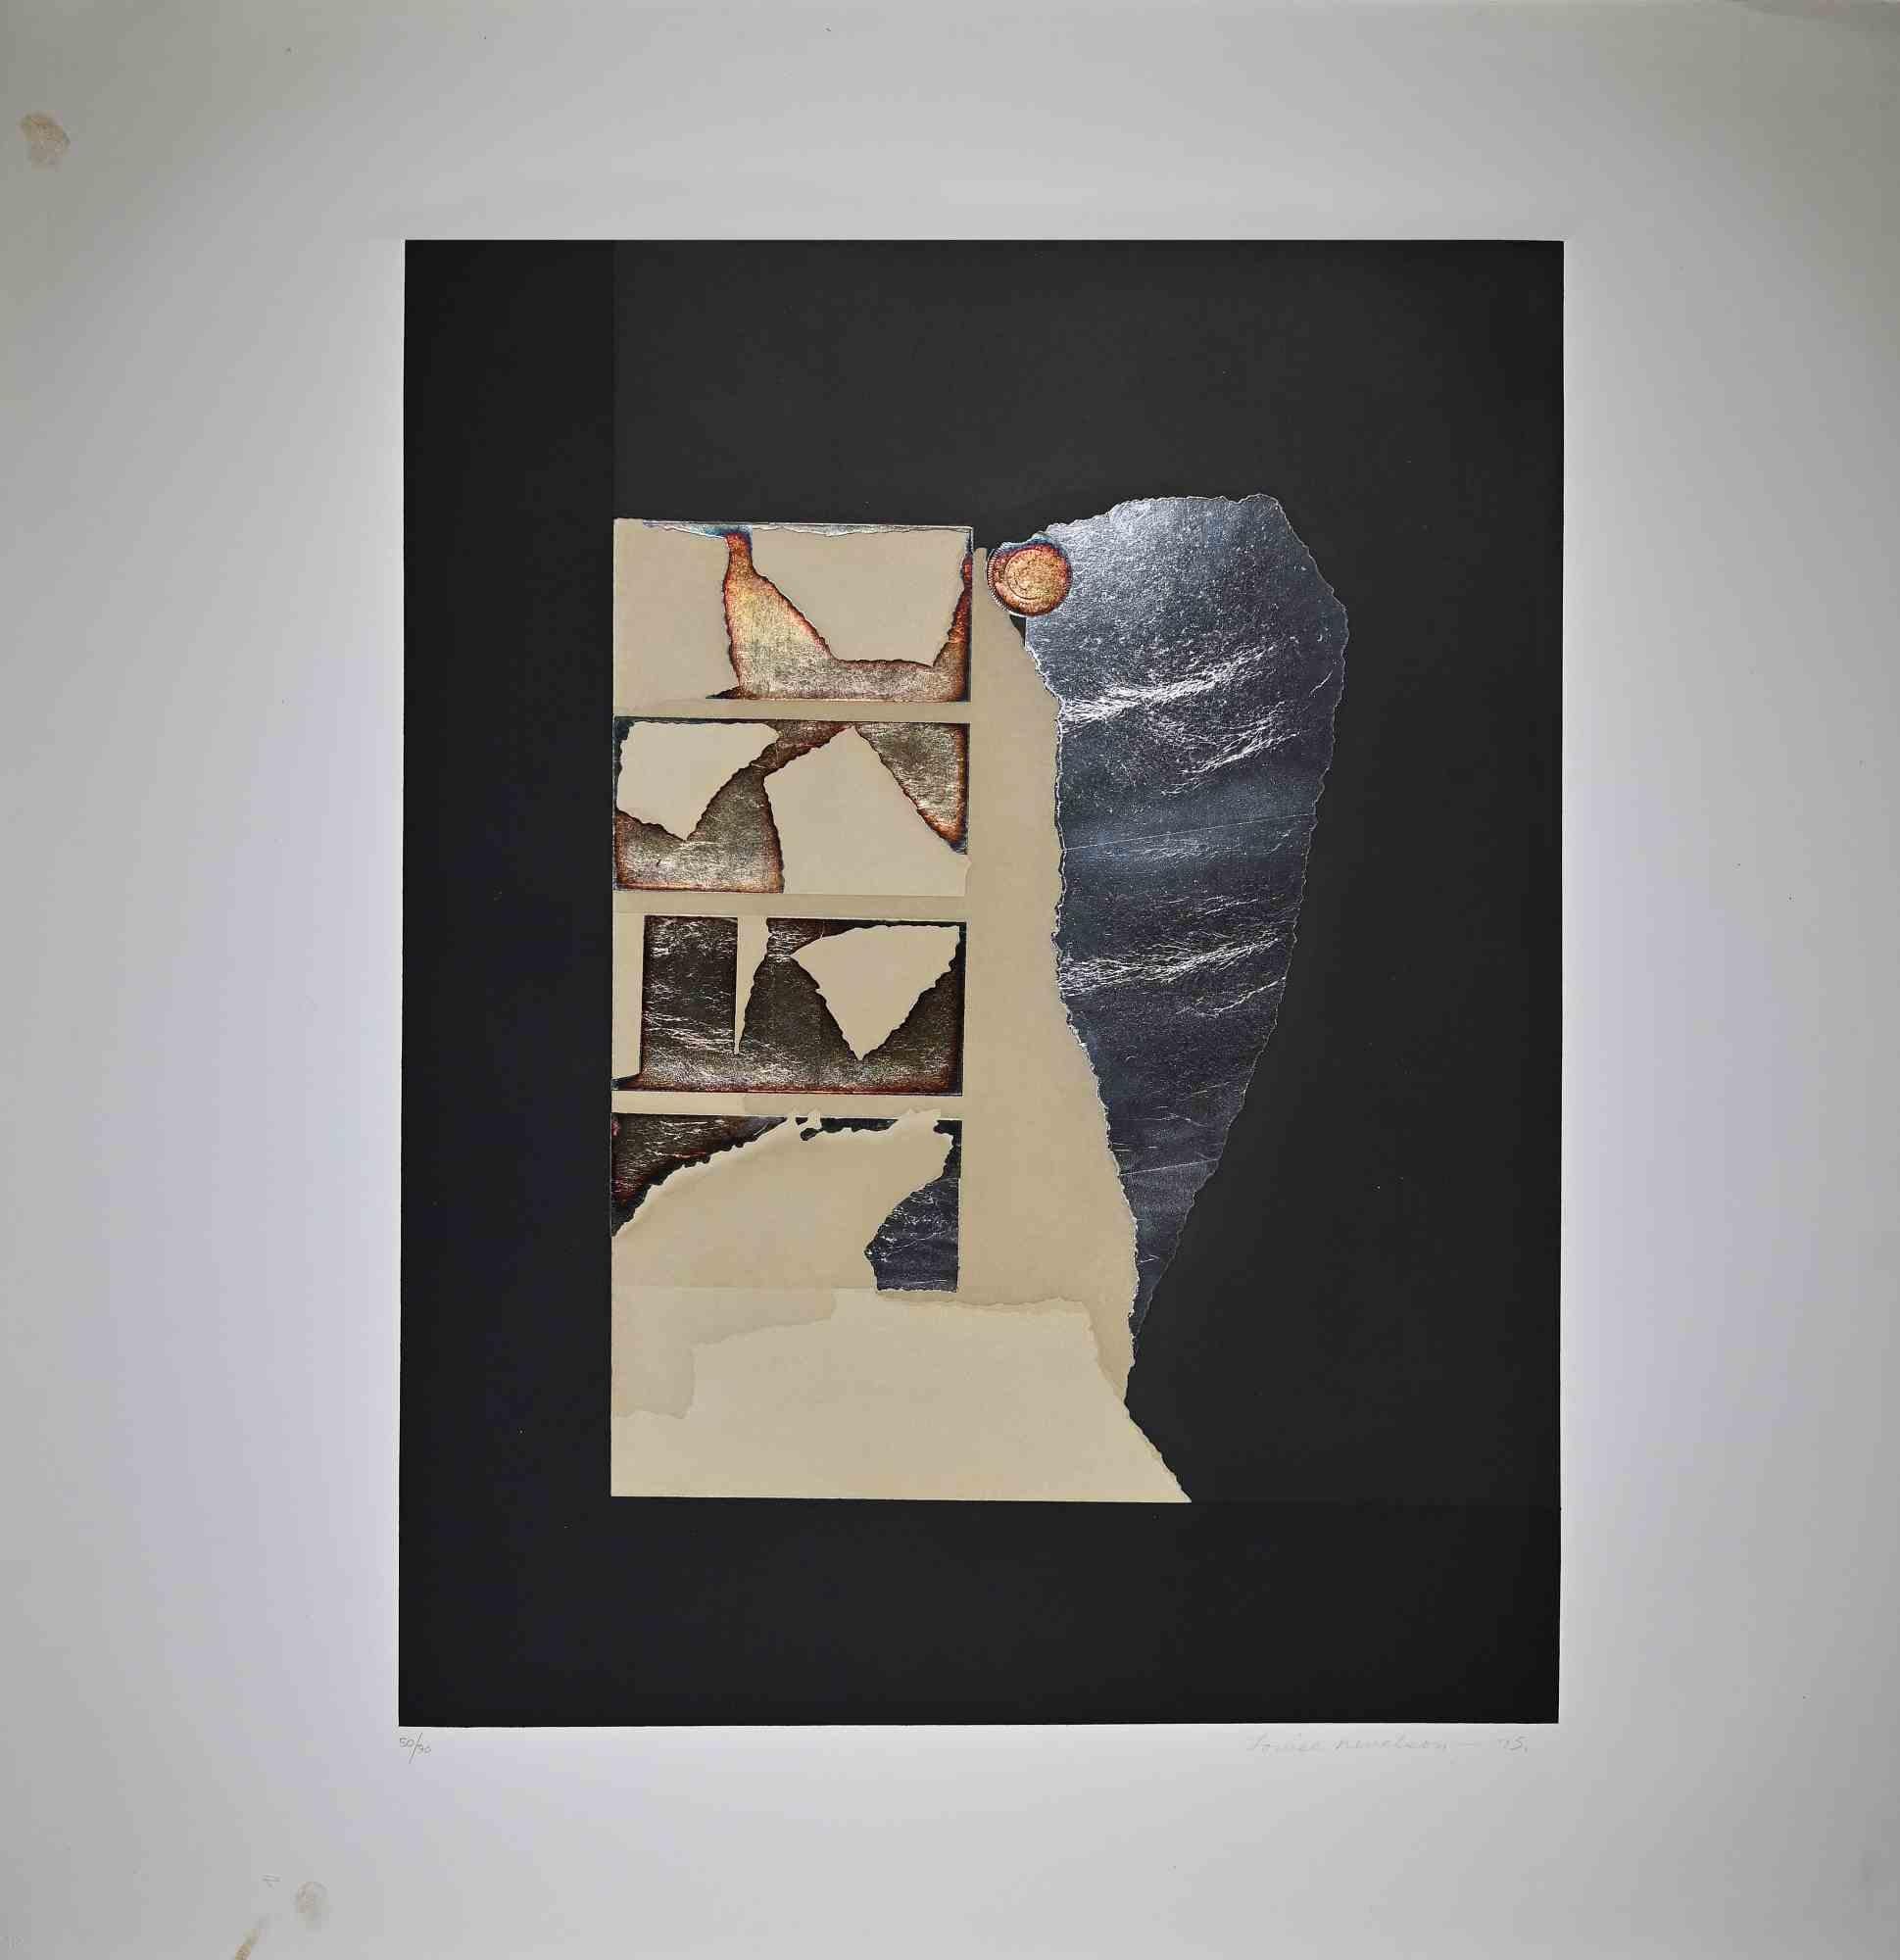 Graphic Presence  is an original Contempory artwork realized by Louise  Nevelson (Poltava, 1899 – 1988) in 1975 .

Original etching and aquatint on copper plate printed in 4 colors on Fabriano Rosaspina paper.

Hand-signed  and dated on the lower